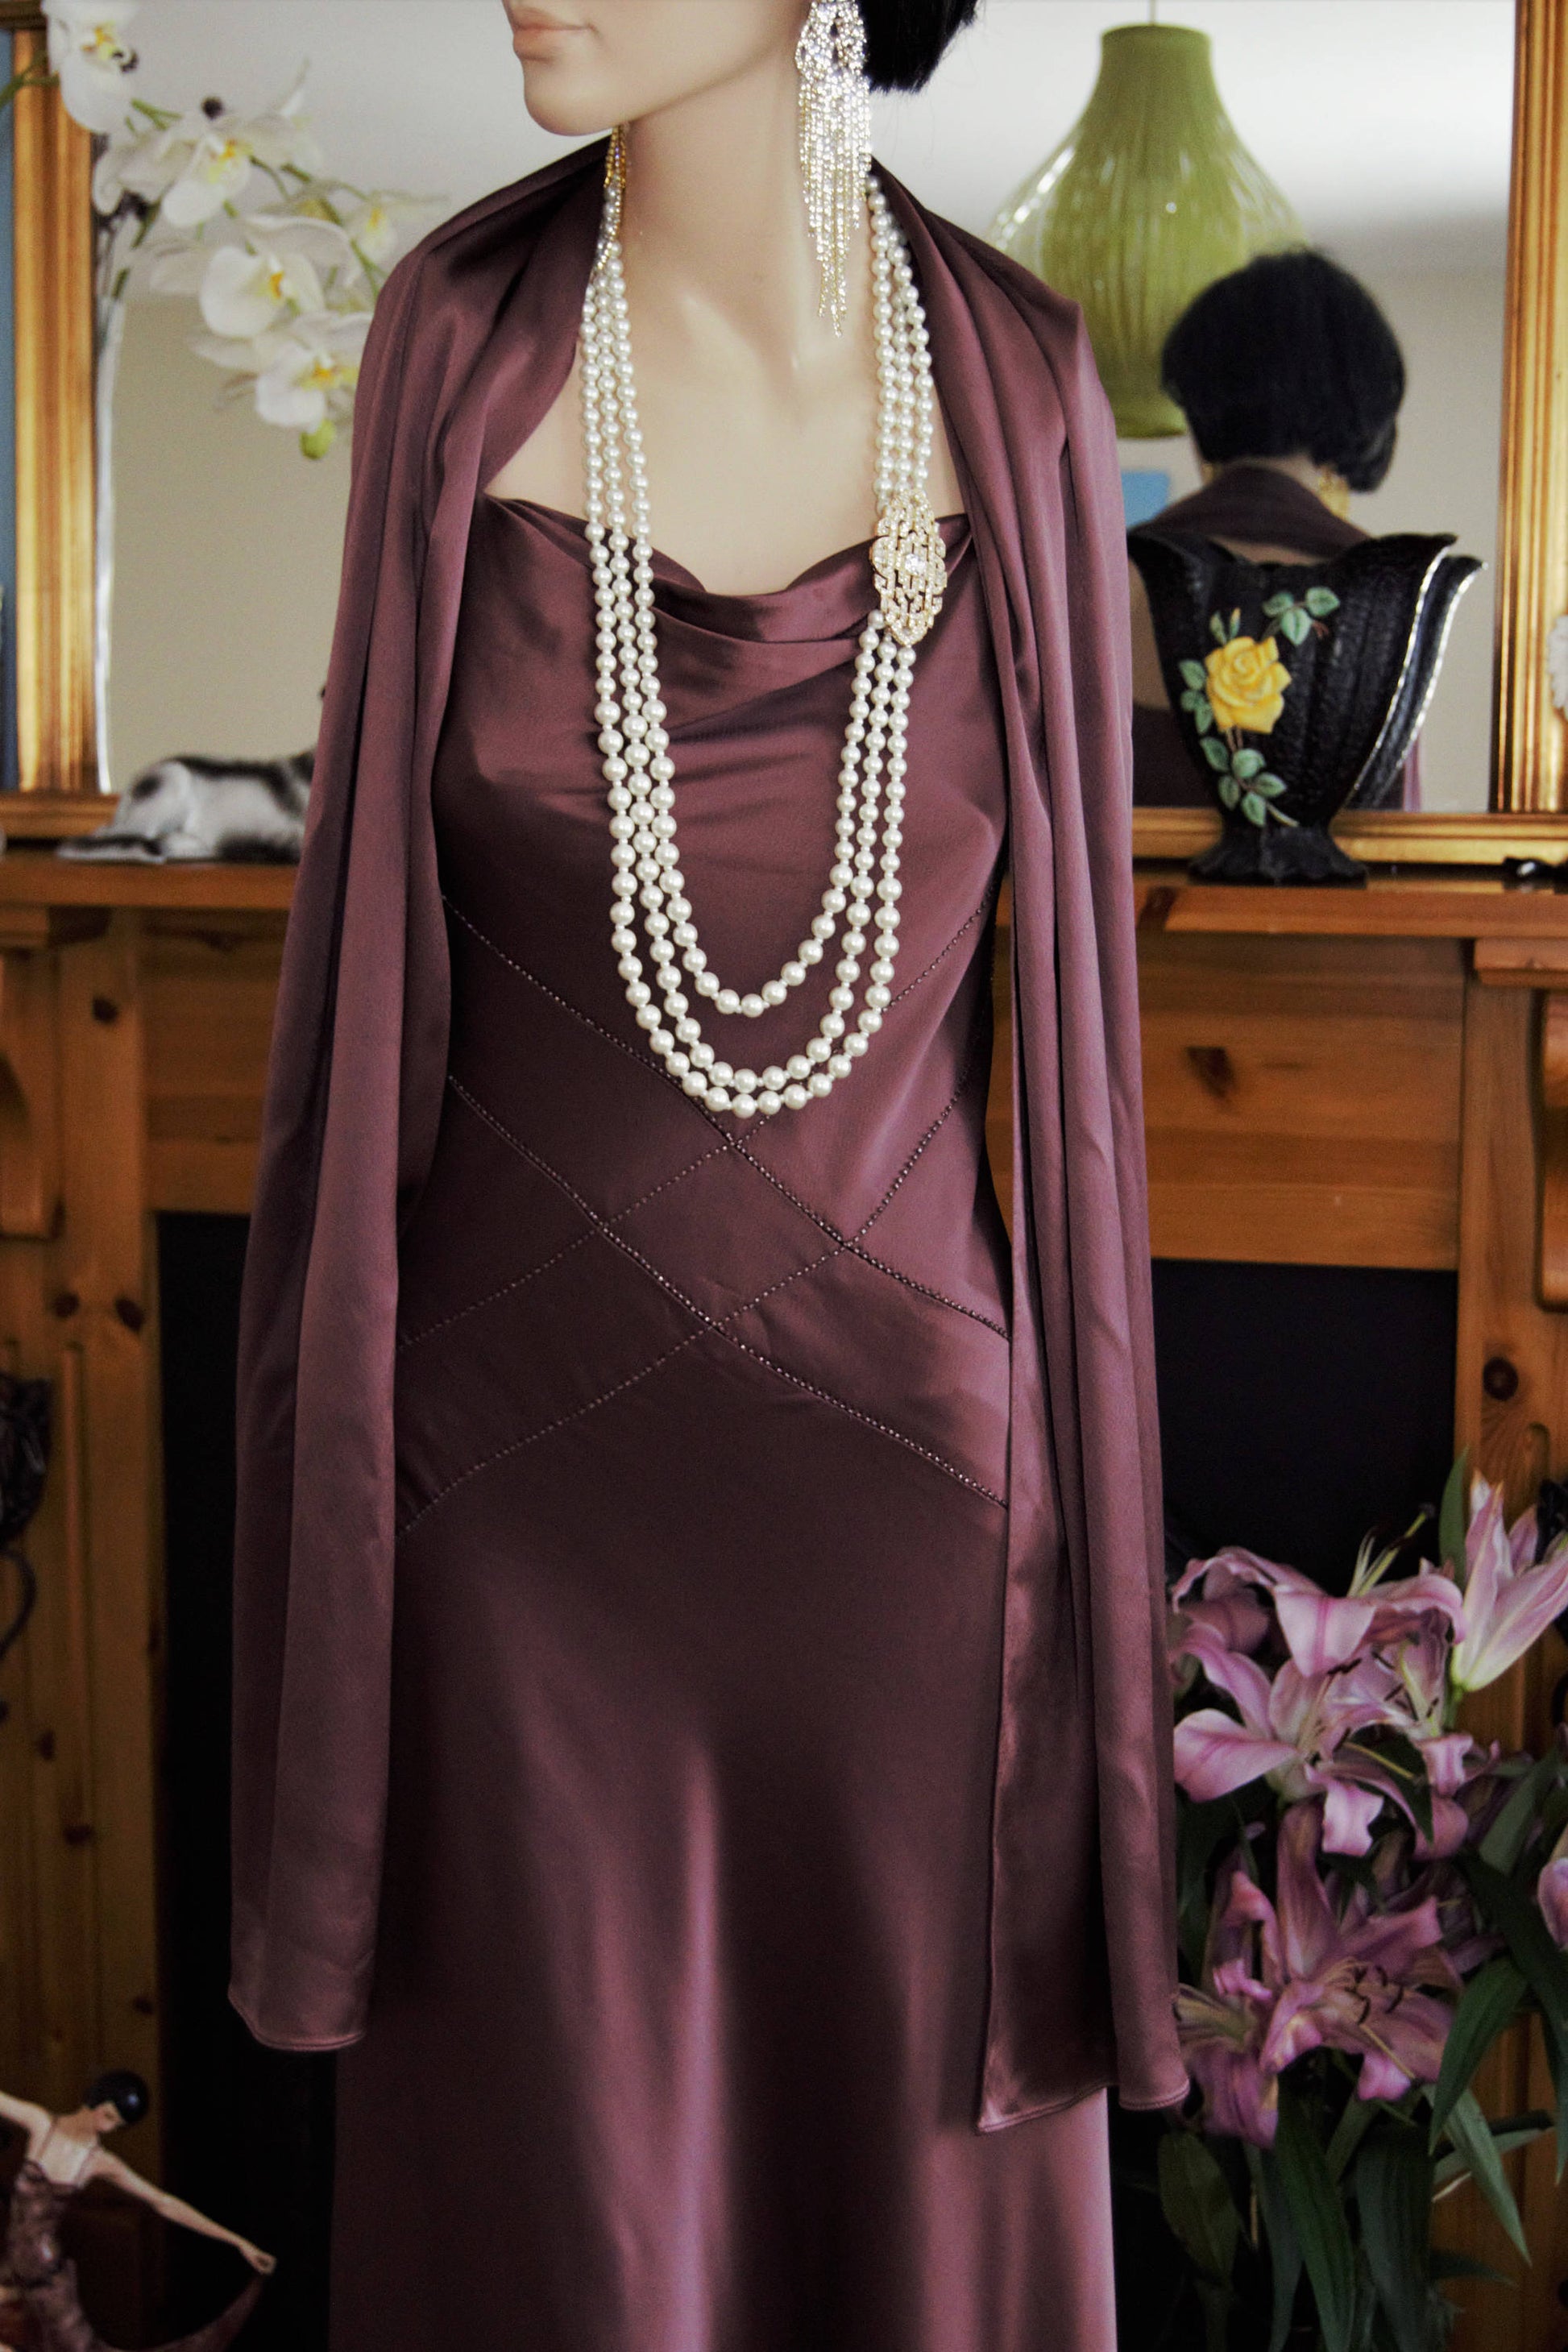 1930's Inspired Gown - Blue Sky Fibers